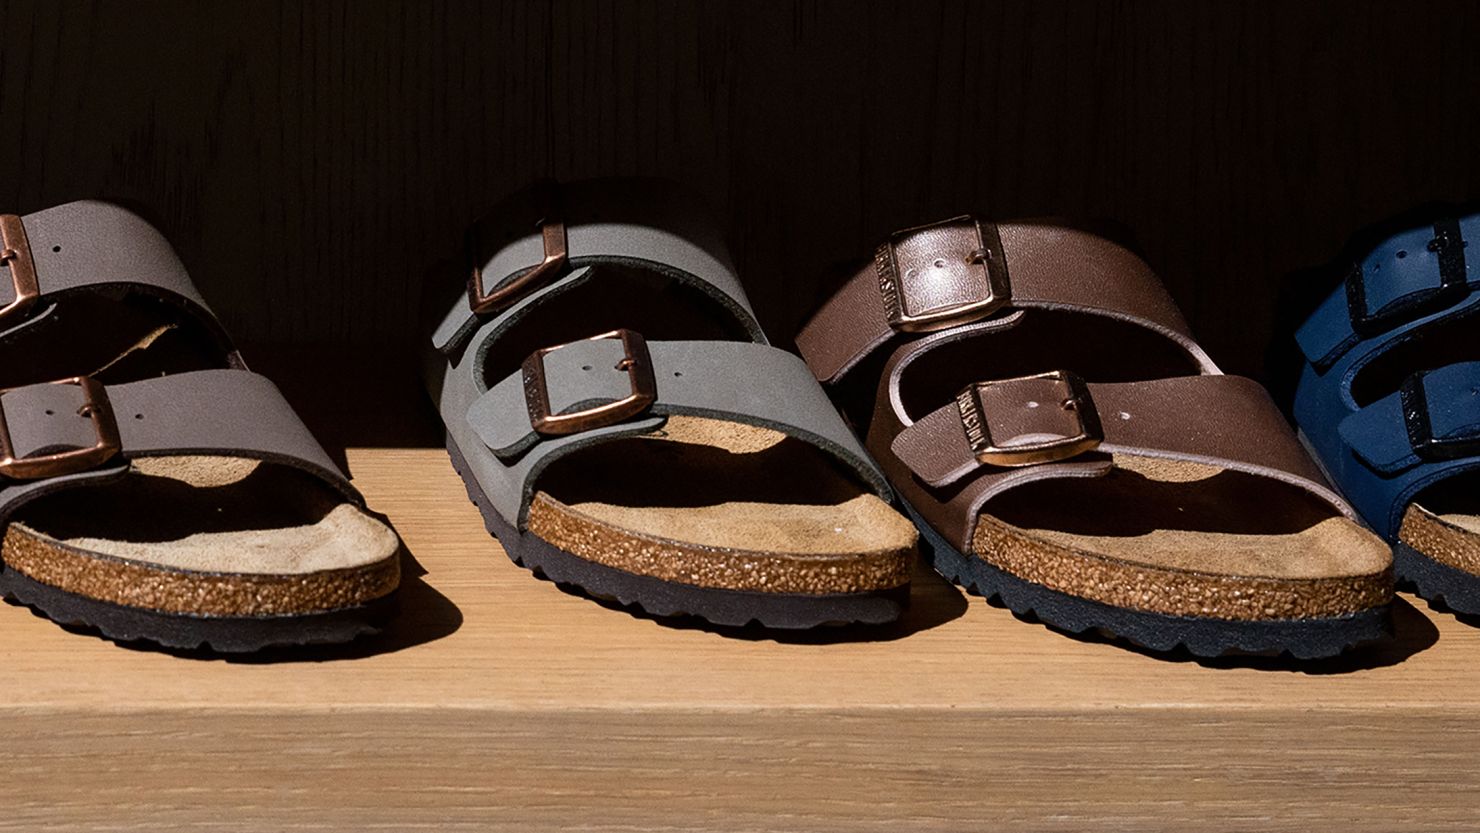 Birkenstock’s IPO turned south after shares closed down 13% on first ...